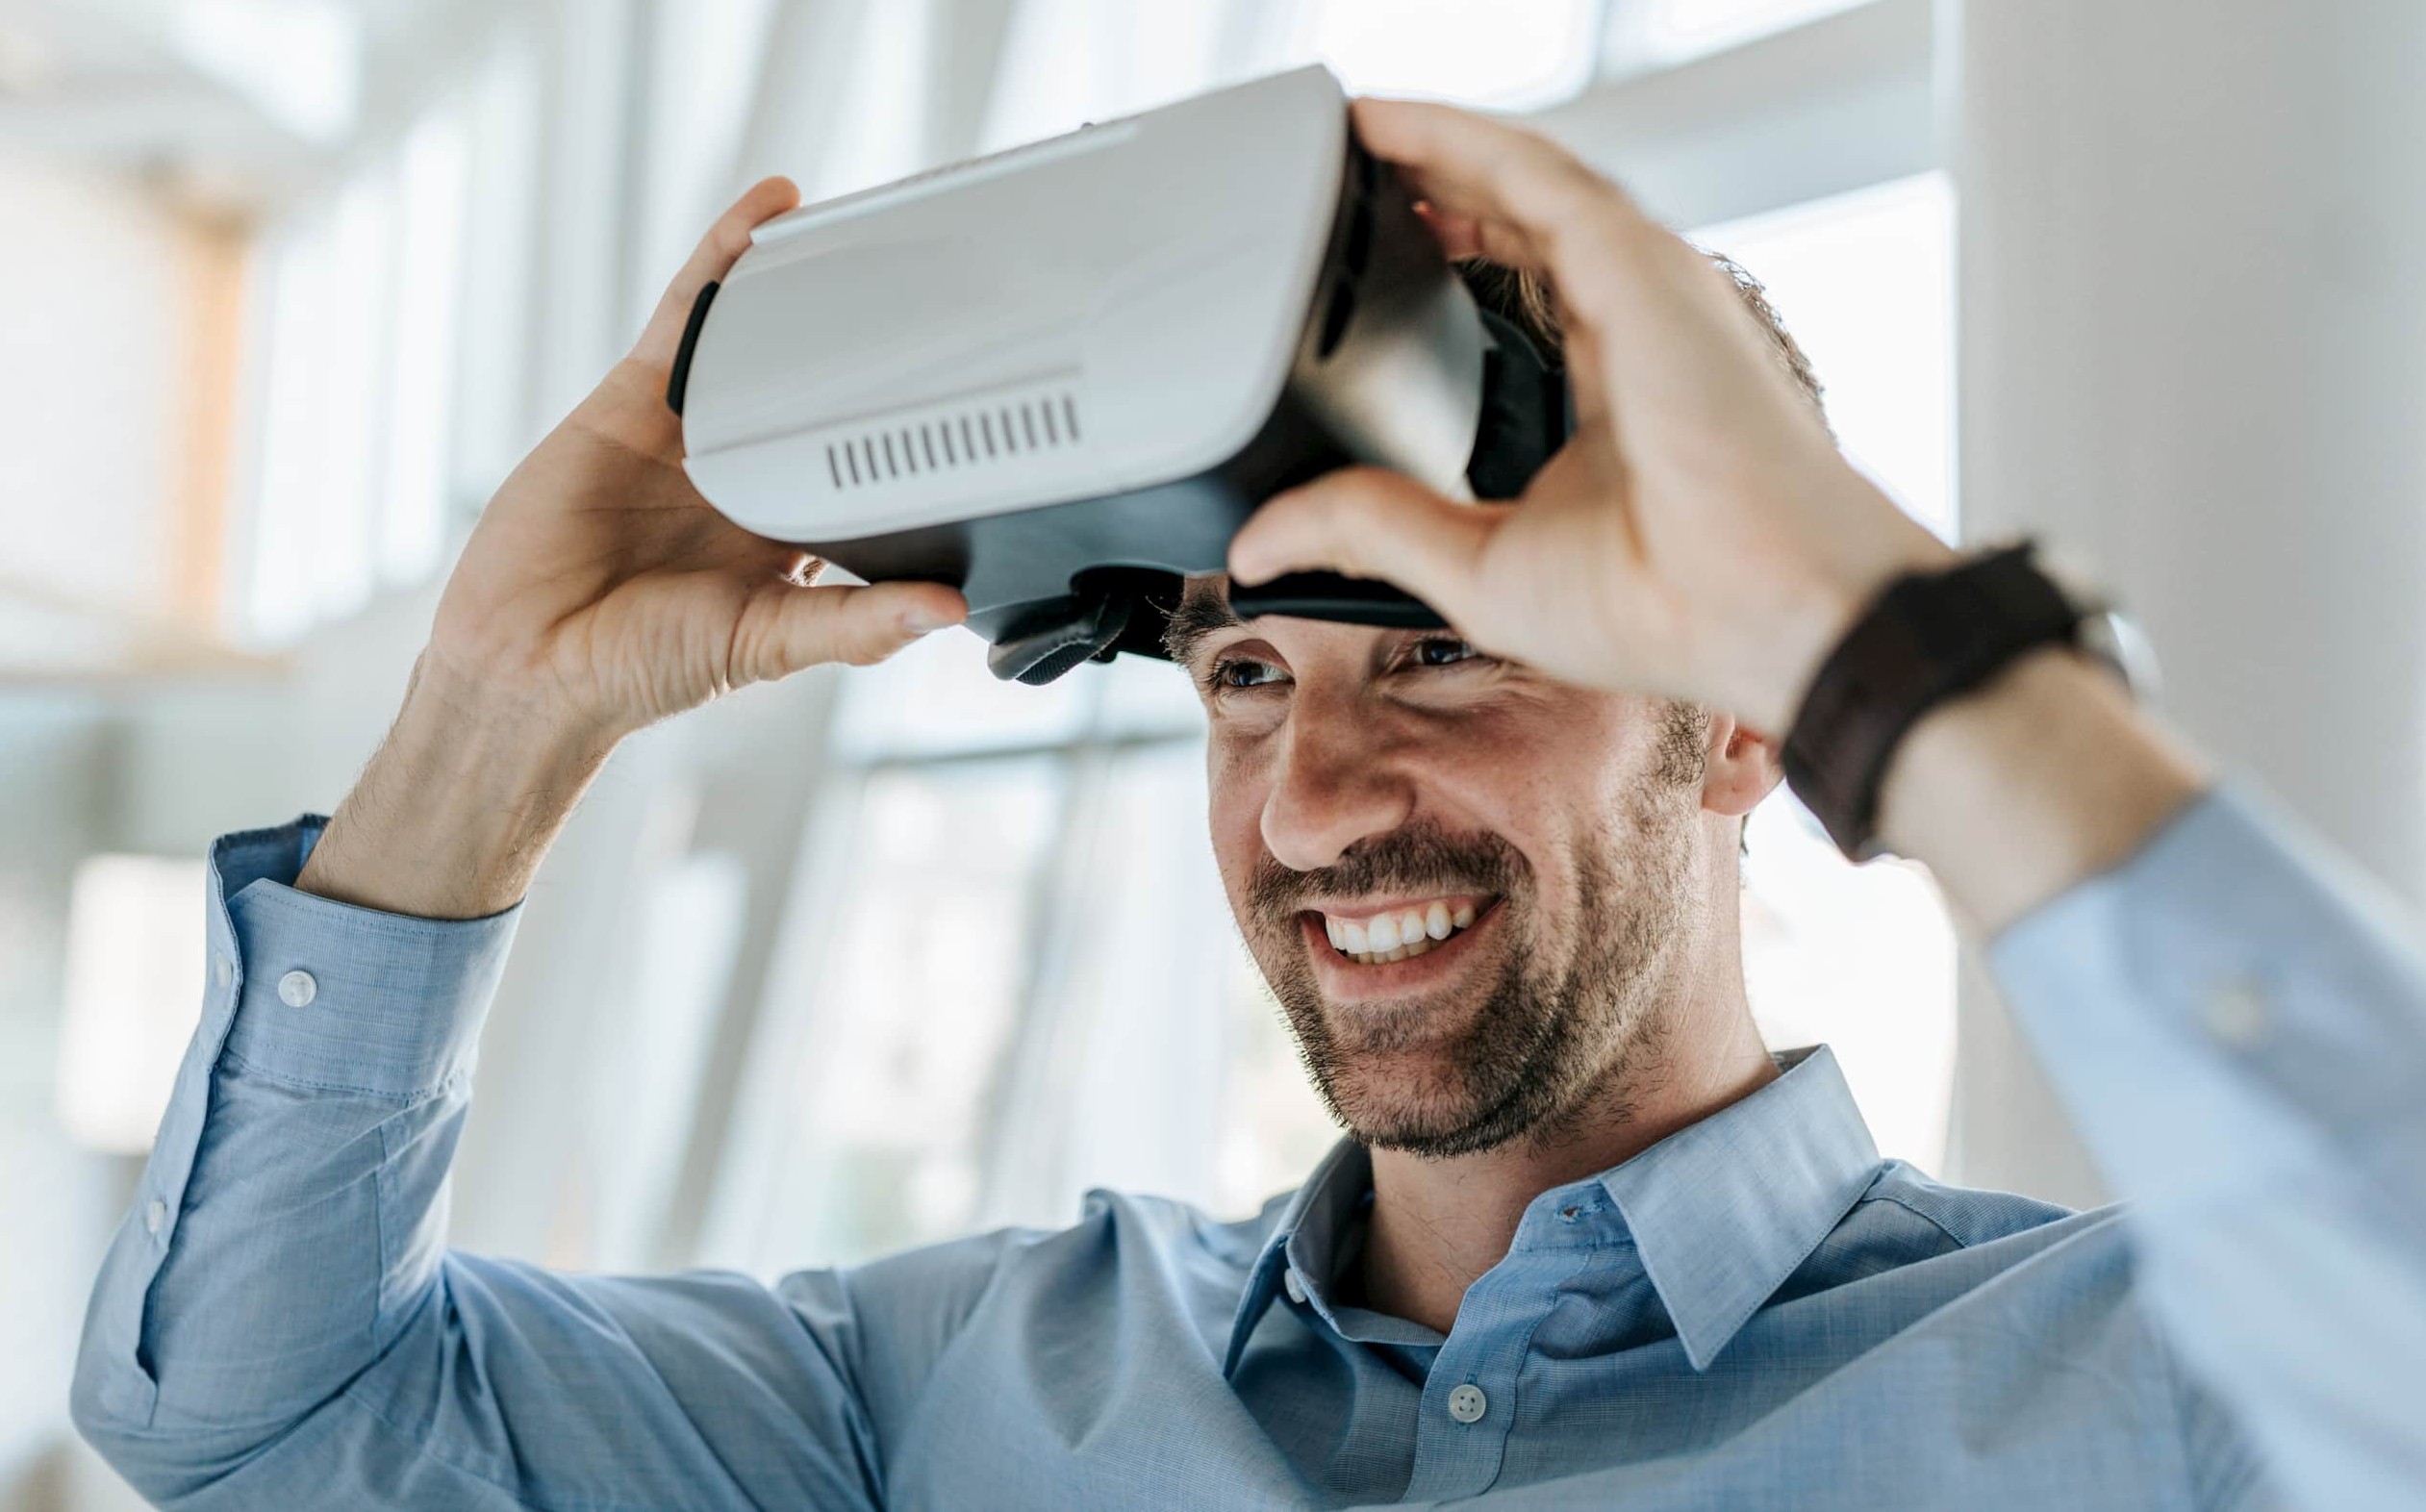 Trends in B2B marketing: Augmented Reality